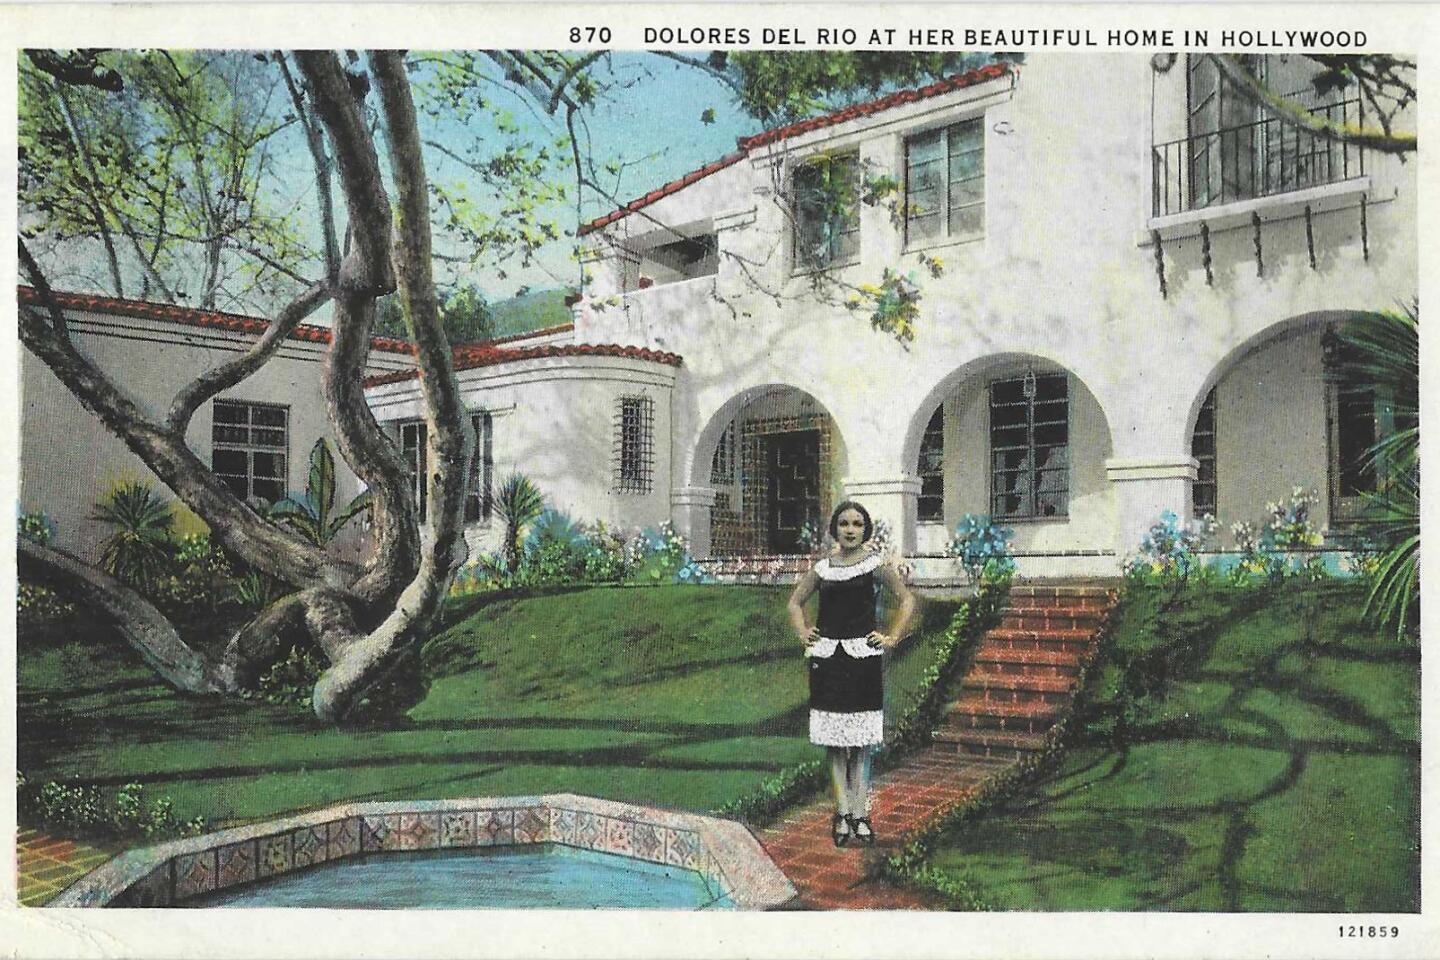 Dolores del Rio — an actor, singer and dancer with successful careers in Hollywood and Mexico — in front of her Spanish-style home in a postcard from Patt Morrison's collection.